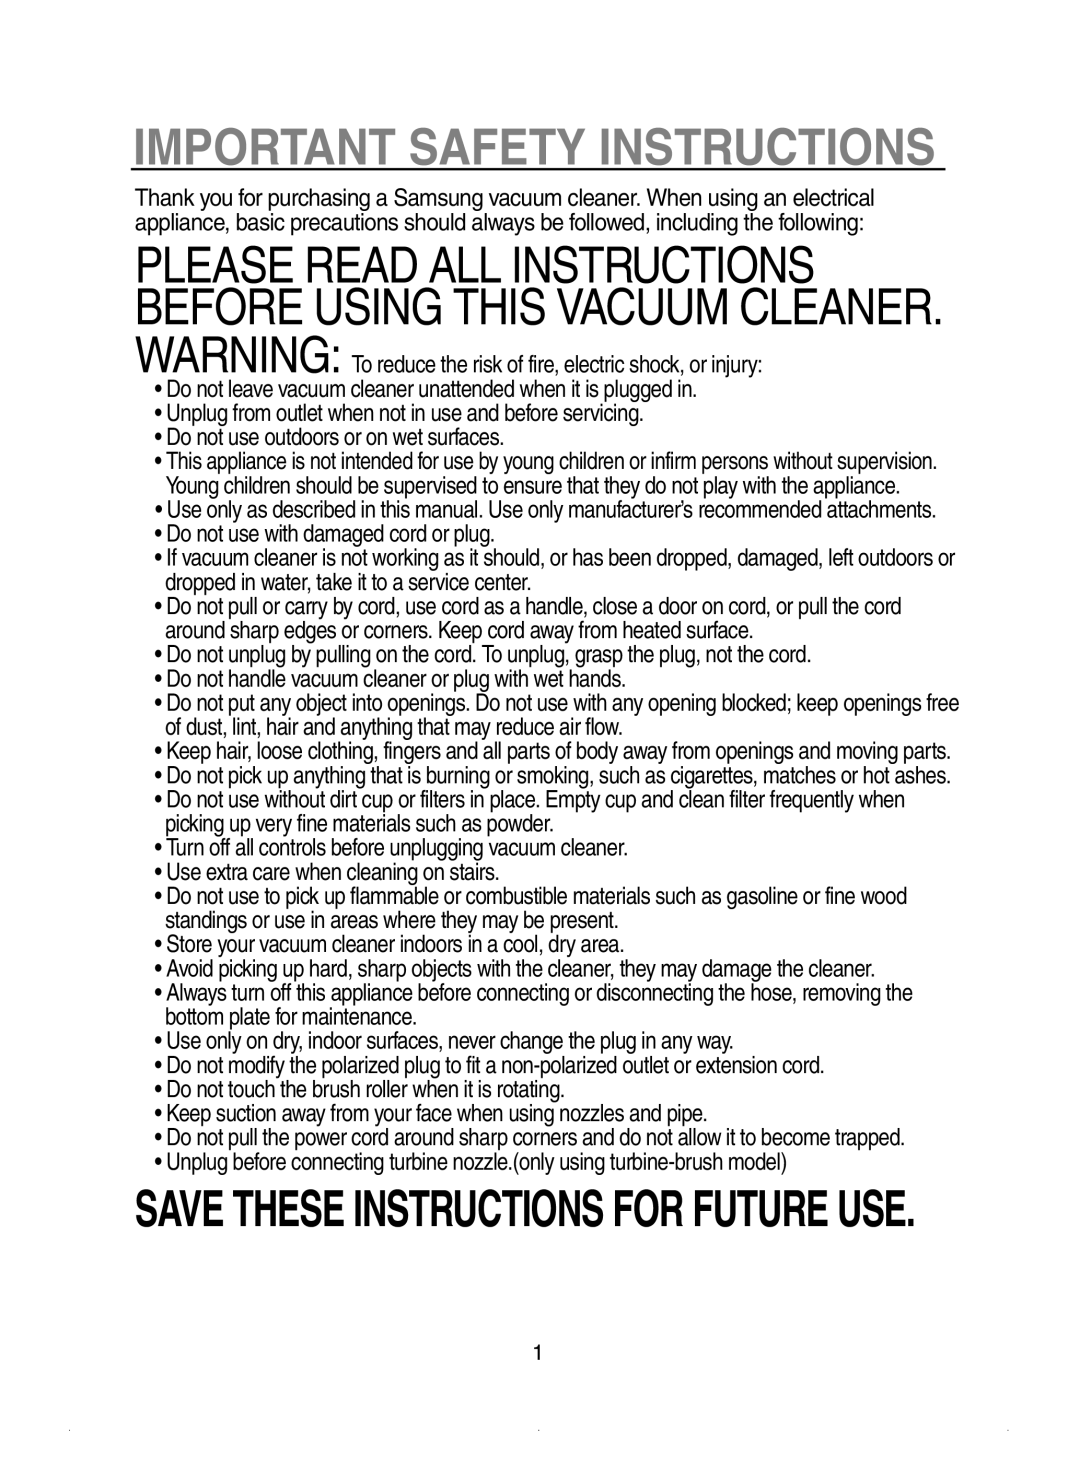 Samsung SU-2930 Series Important Safety Instructions, Please Read All Instructions Before Using This Vacuum Cleaner 